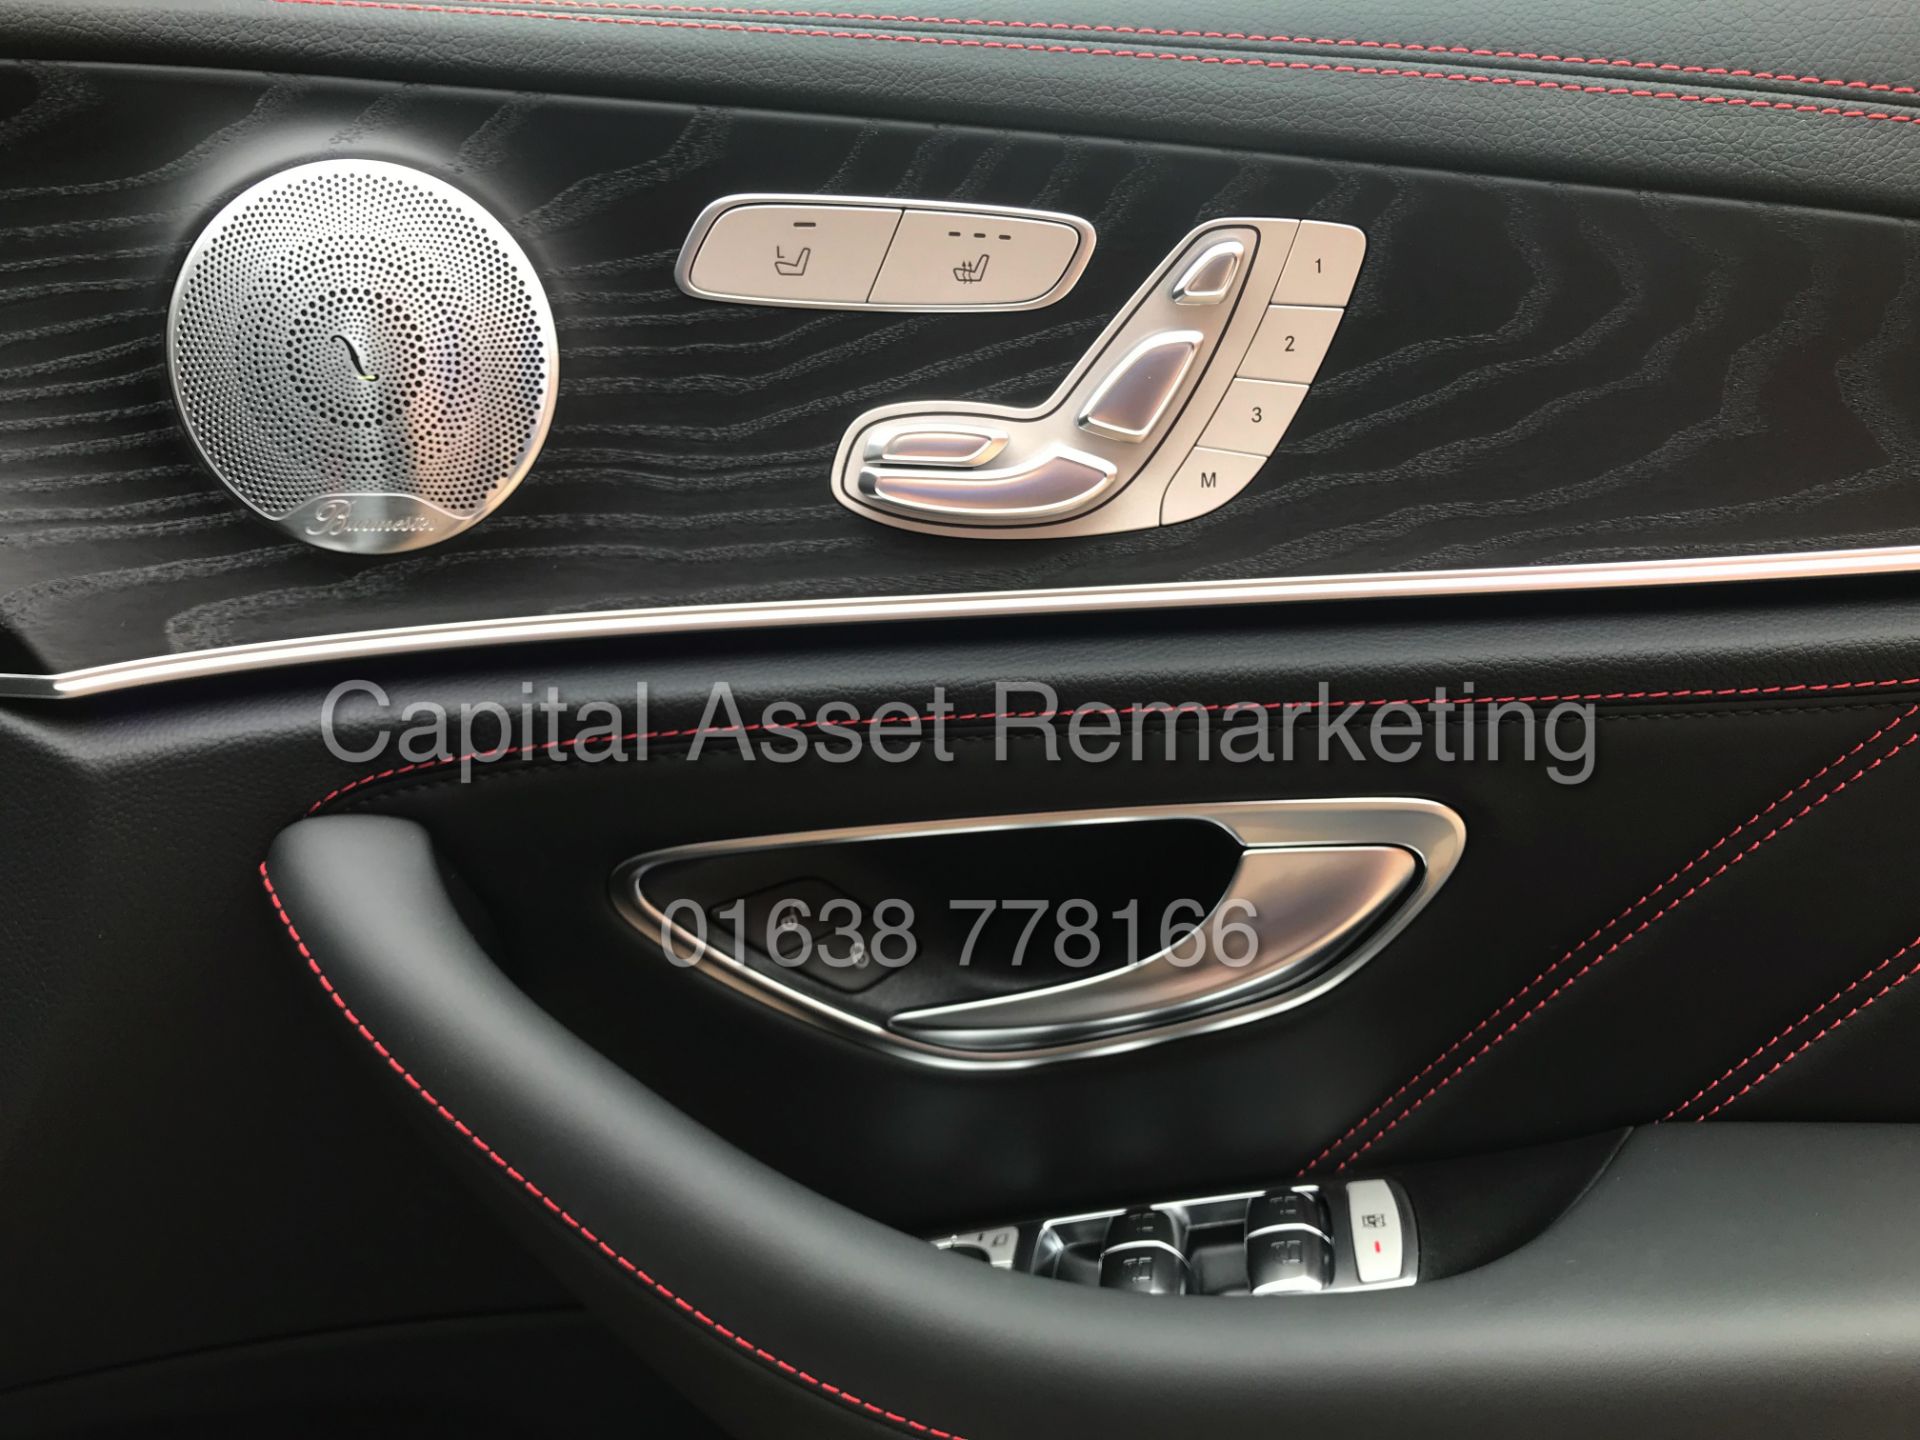 MERCEDES E53 AMG TURBO 4MATIC + (19 REG) PREMIUM + NIGHT EDITION *FULLY LOADED* COST AROUND £70,000 - Image 38 of 46